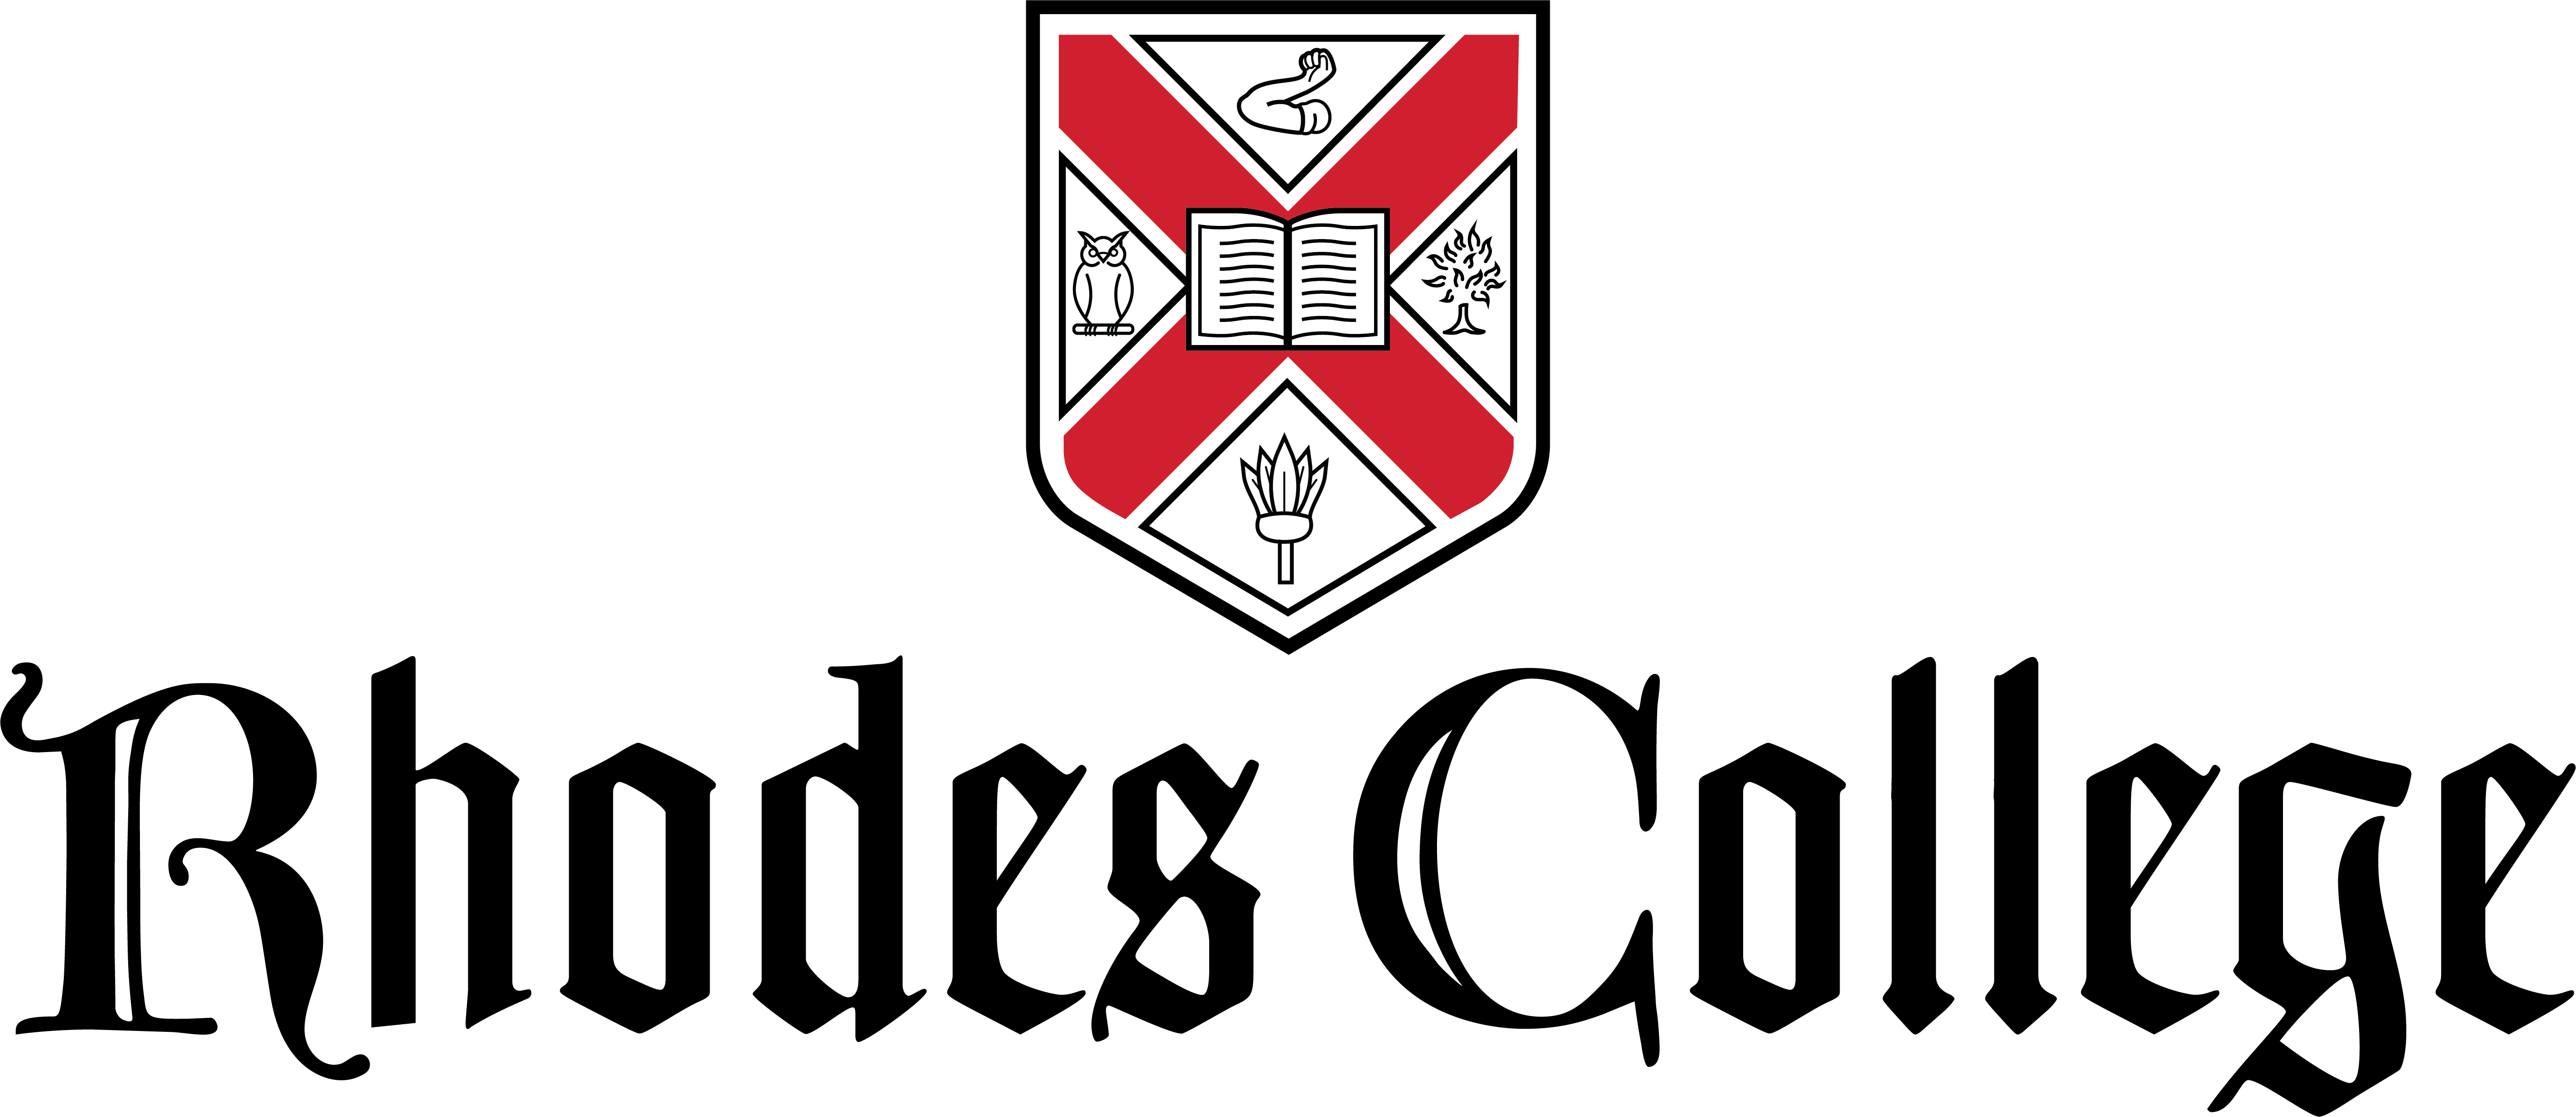 Picture of the Rhodes College logo